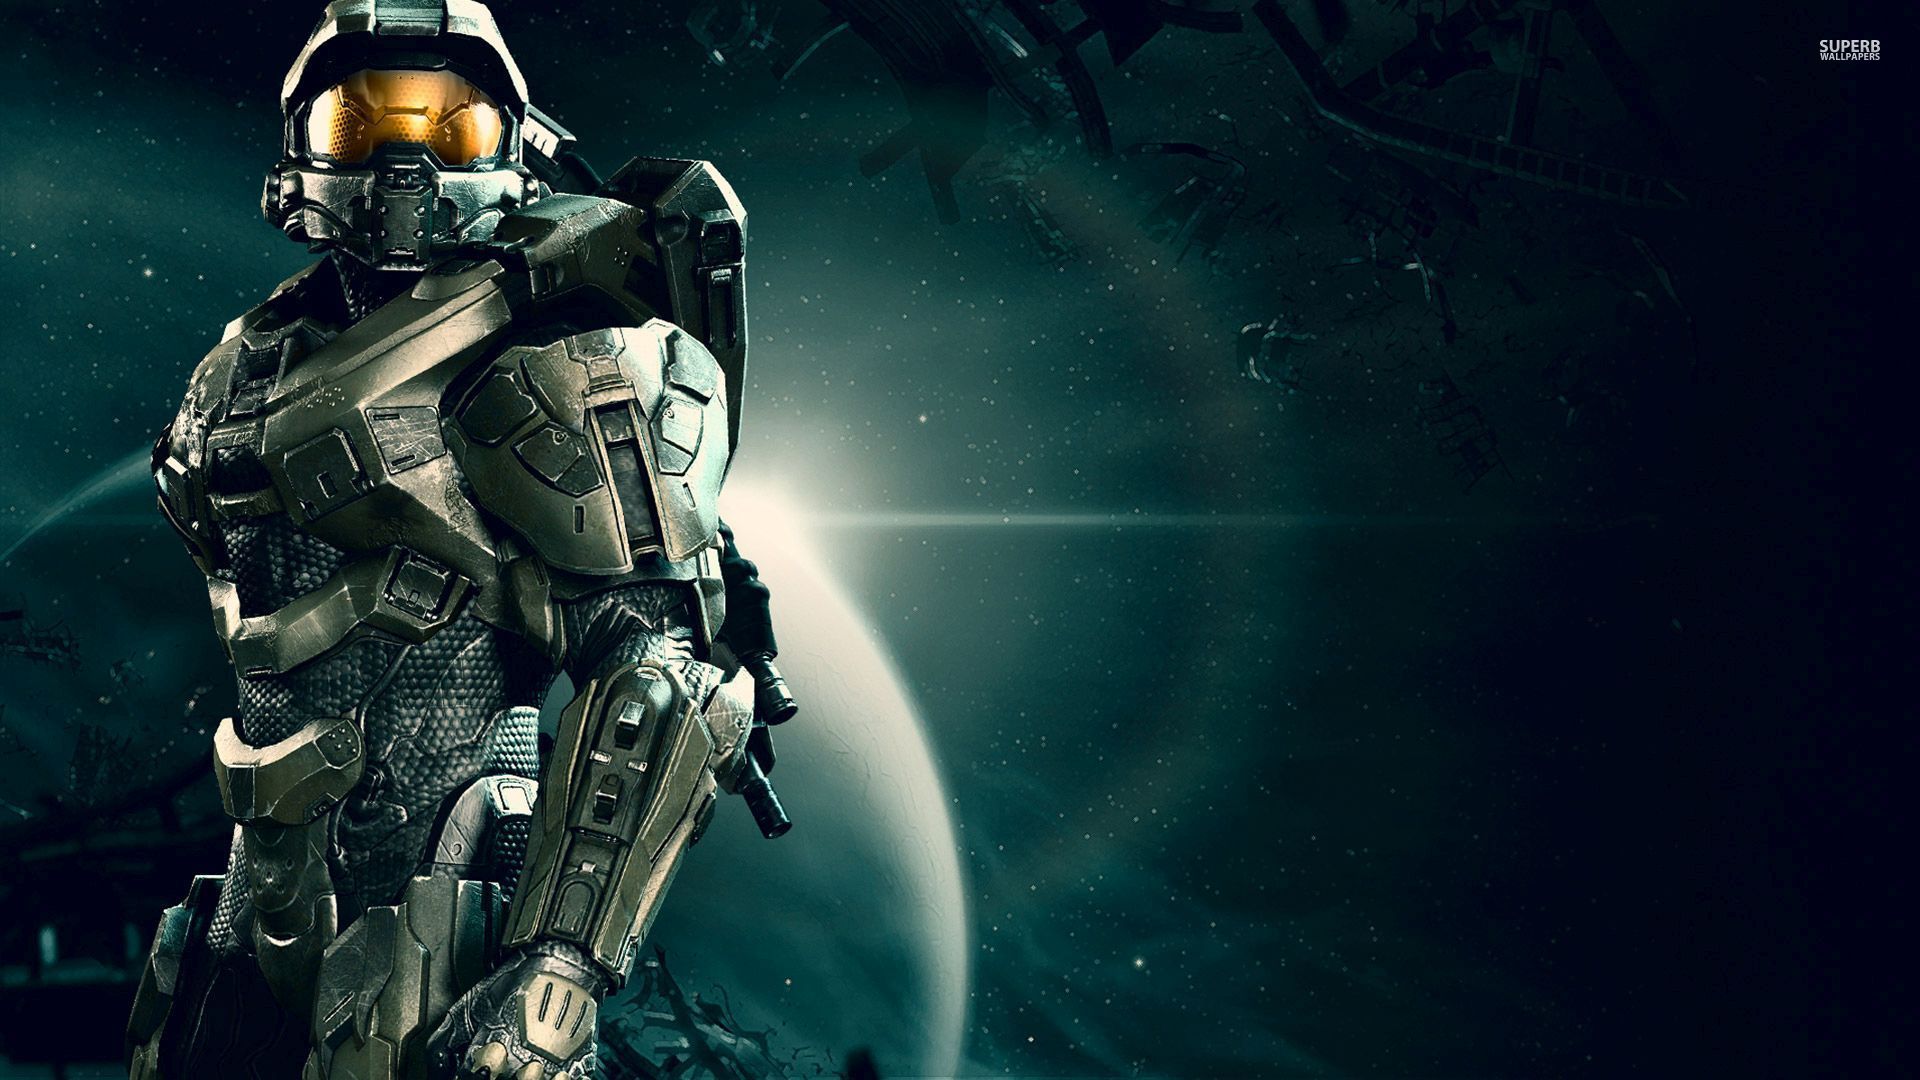 Halo: The Master Chief Collection wallpaper 1920x1080